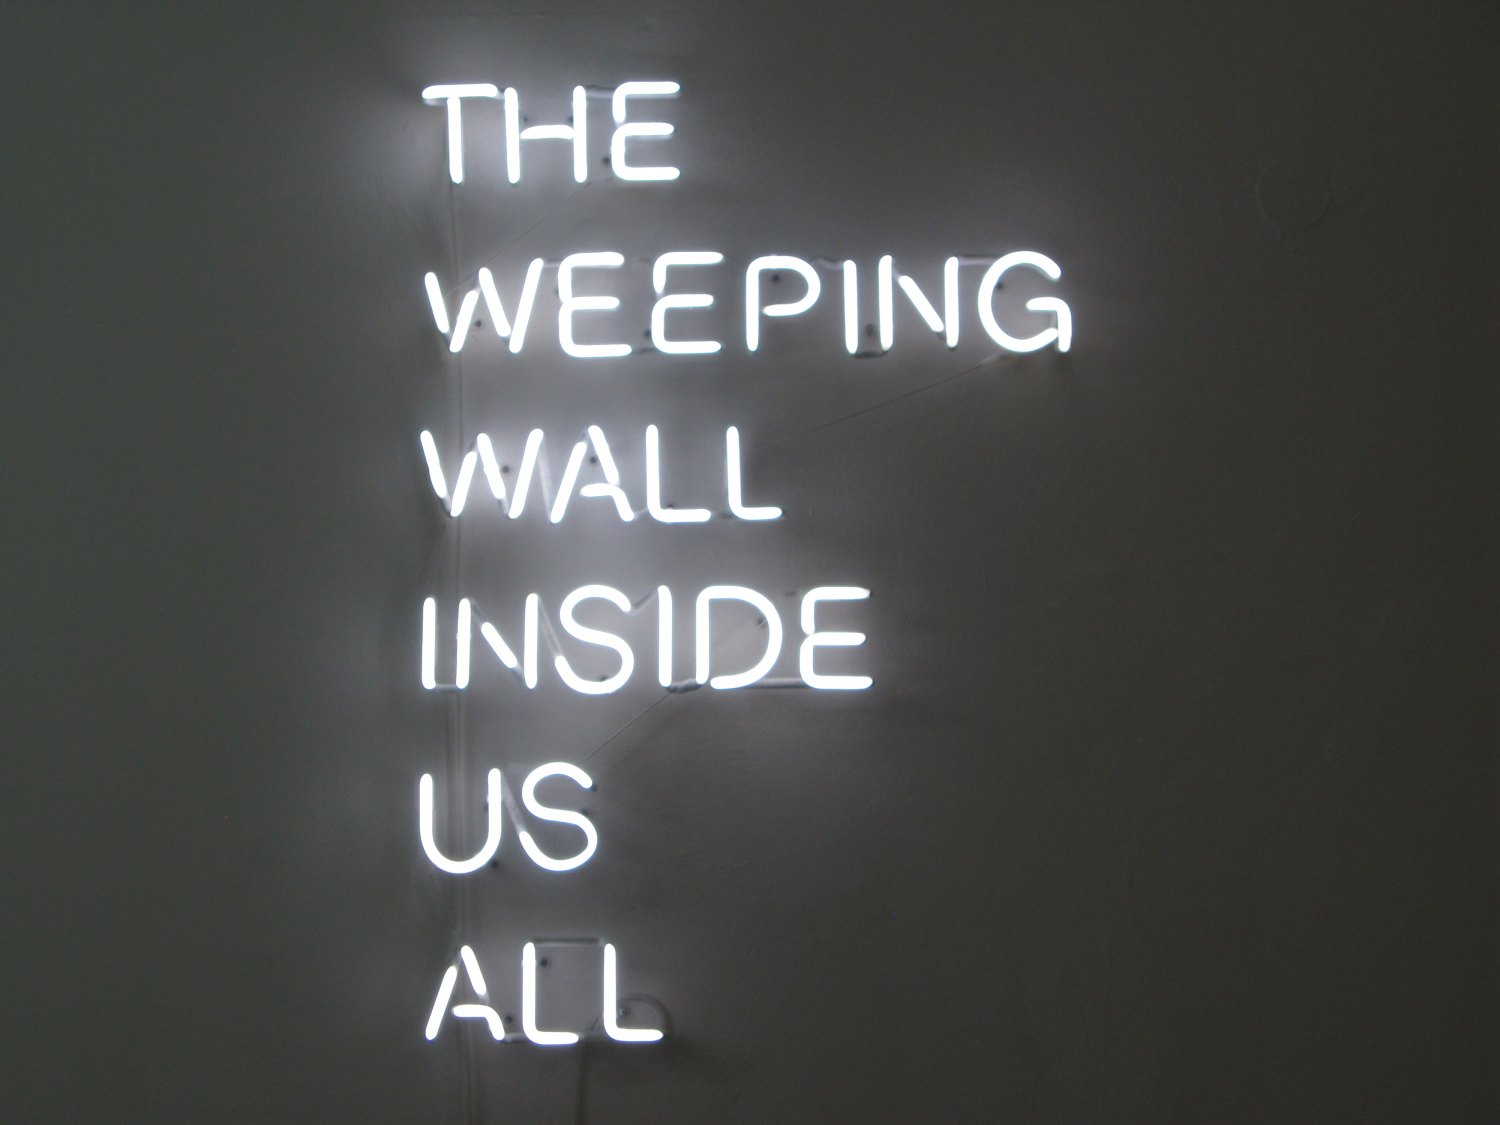 Karl Holmqvist & Claire Fontaine The Weeping Wall Inside Us All, 2009 Neon, 116 × 80 cm